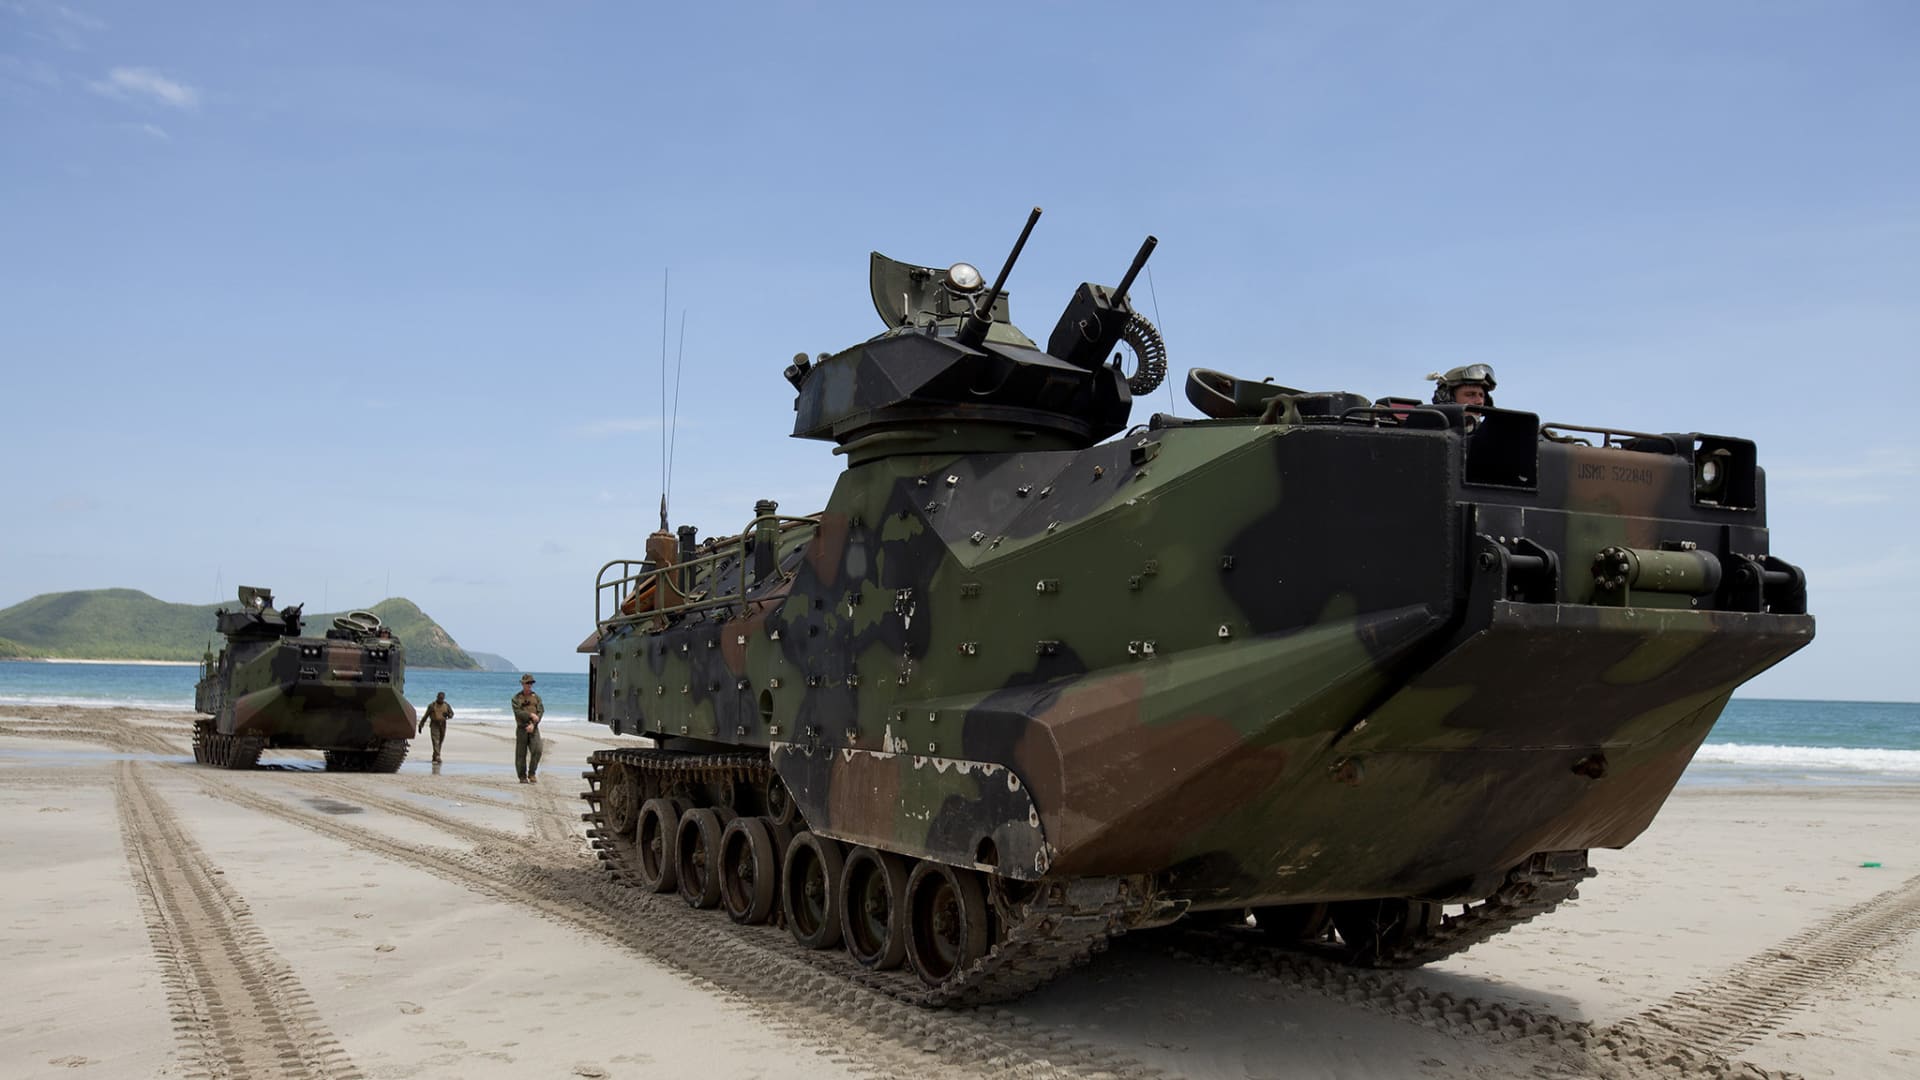 U.S. Marines with the 3rd Marine Division, III Marine Expeditionary Force position their assault amphibious vehicles on the beach during an amphibious raid exercise with Royal Thai Marines at Hat Yao, Thailand, on June 10, 2013.